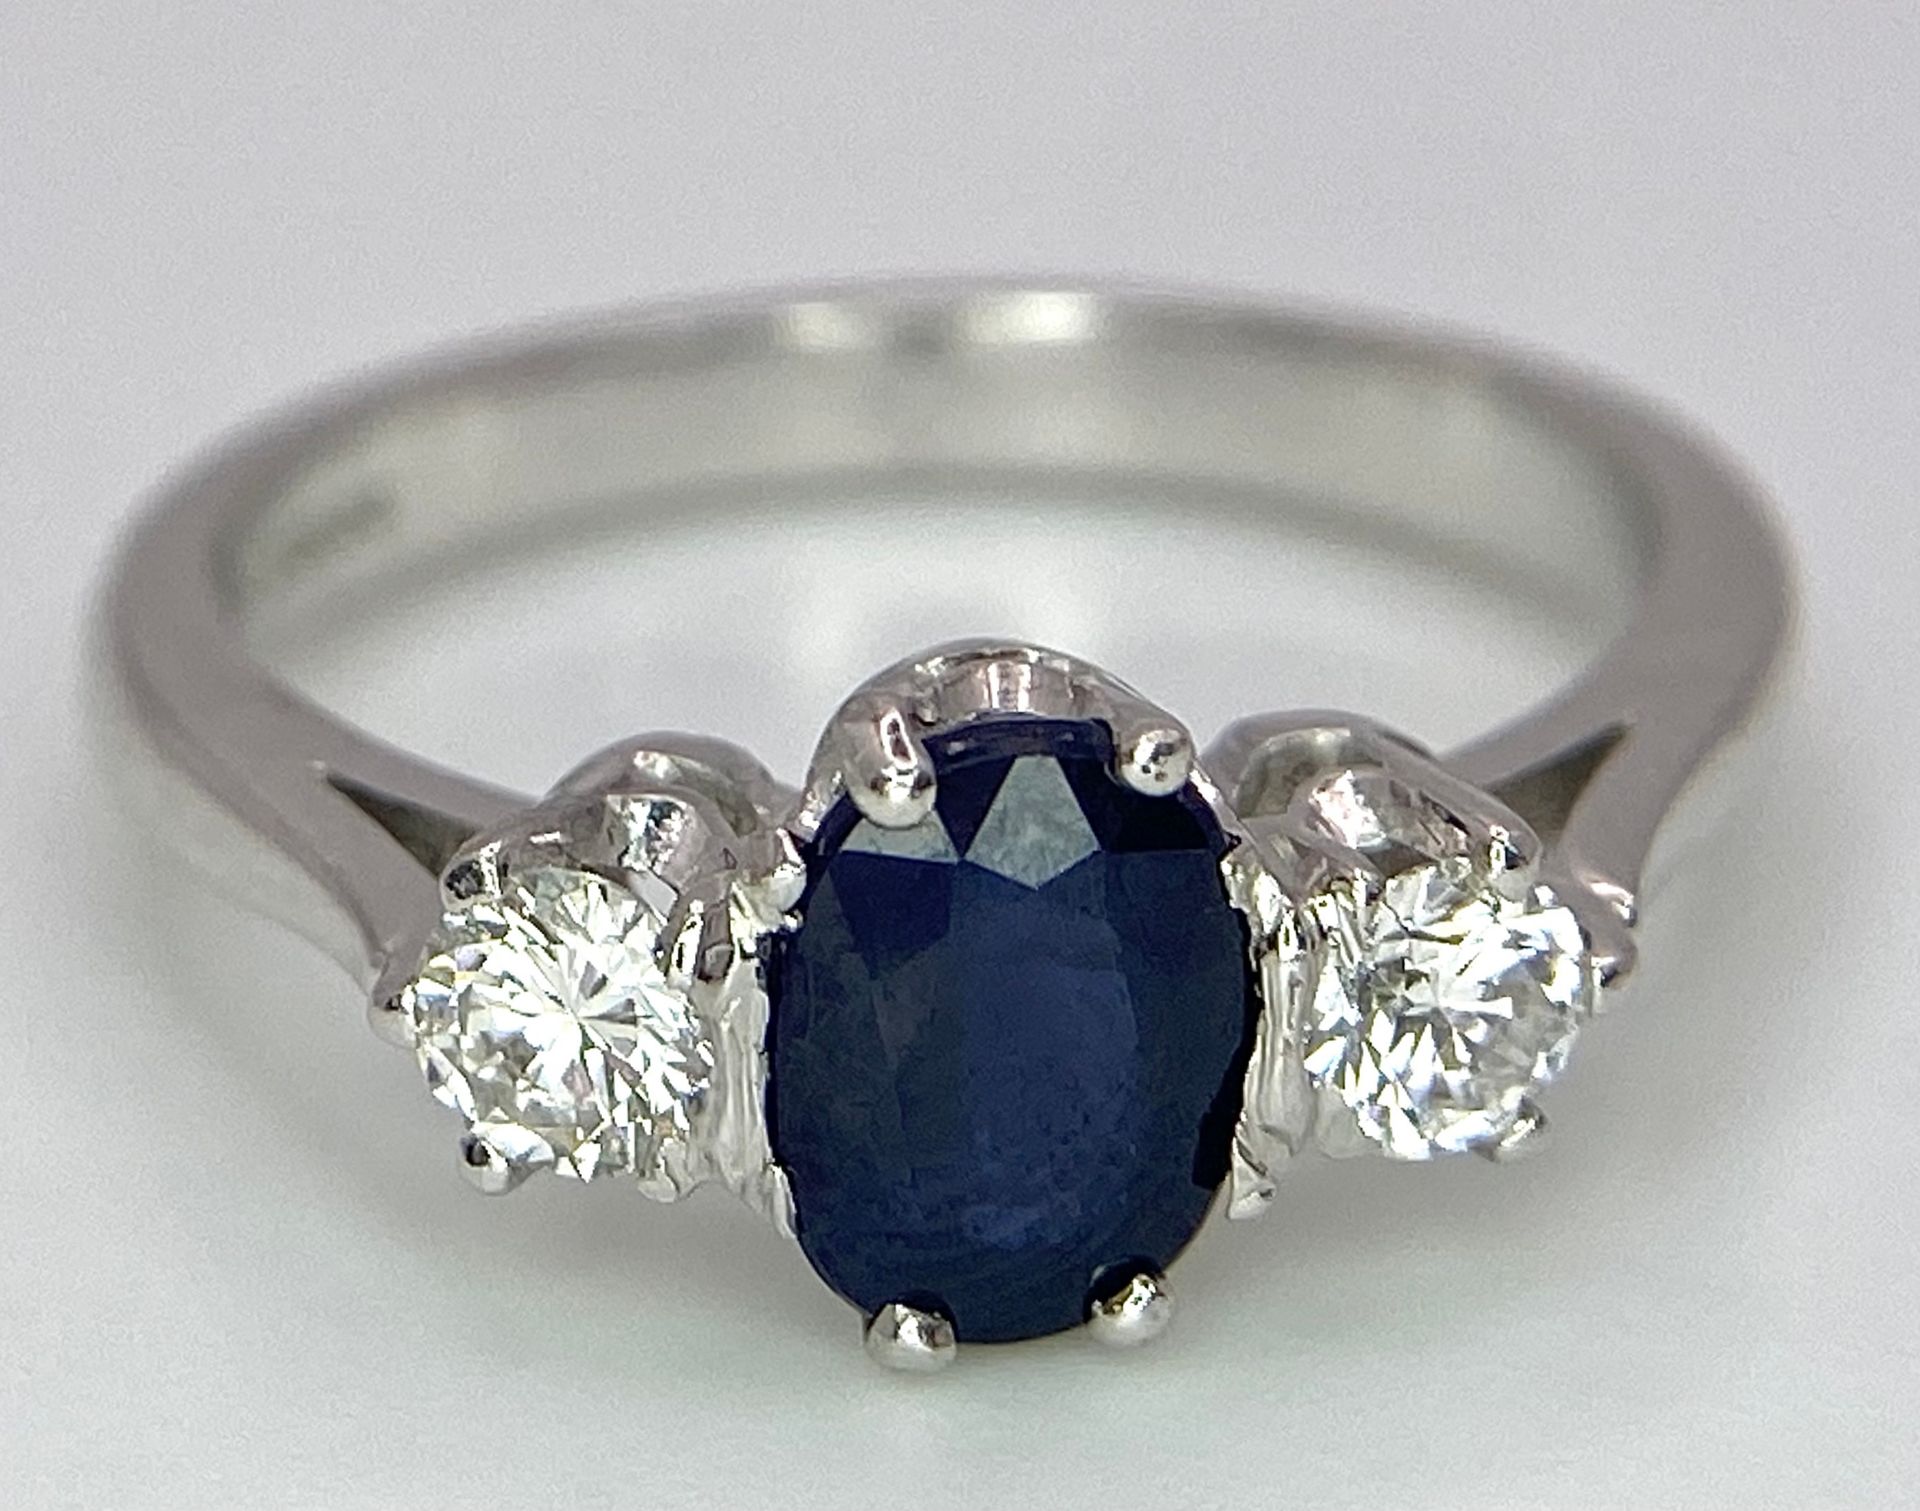 AN 18K WHITE GOLD, DIAMOND AND SAPPHIRE 3 STONE RING. OVAL BLUE SAPPHIRE - 0.75CT AND 0.30CT OF - Bild 4 aus 6